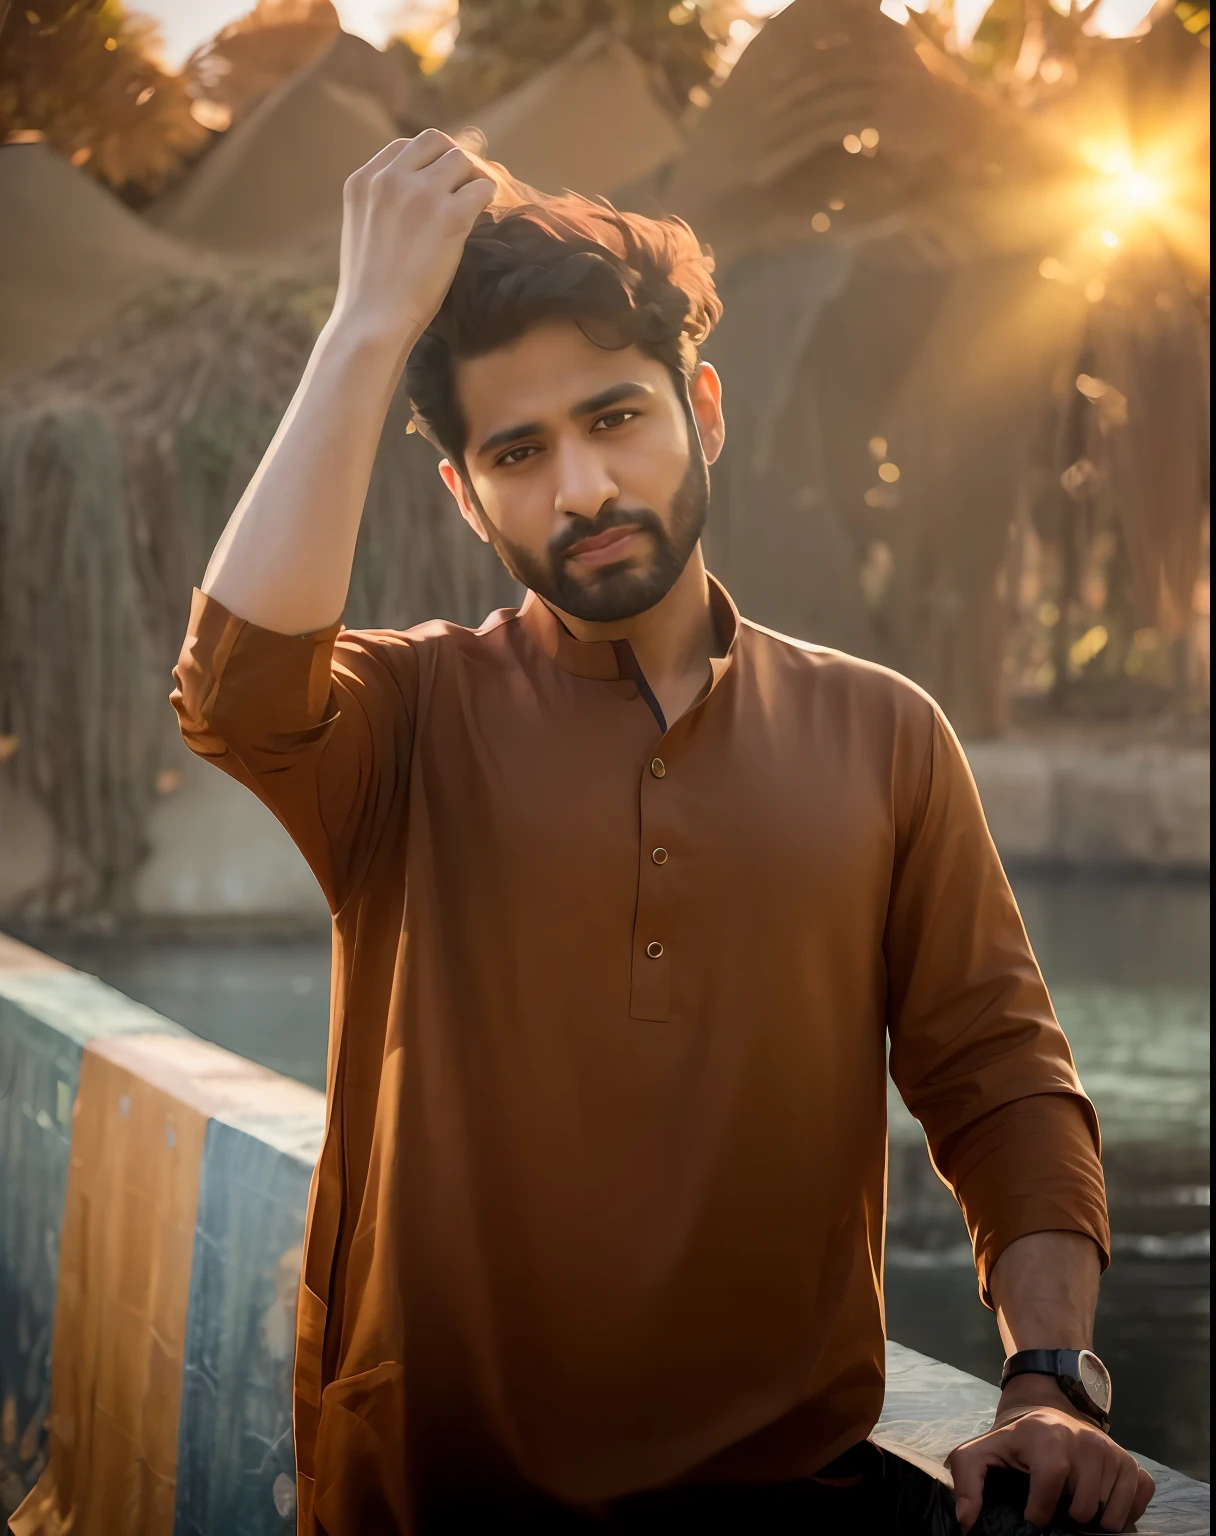 arafed man with a beard and a brown shirt standing on a bridge, wearing a kurta, wearing a silk kurta, mid shot portrait, brown shirt, modeling shoot, handsome man, high quality portrait, profile pic, kyza saleem, brown clothes, portrait shot, during golden hour, profile picture 1024px, model posing